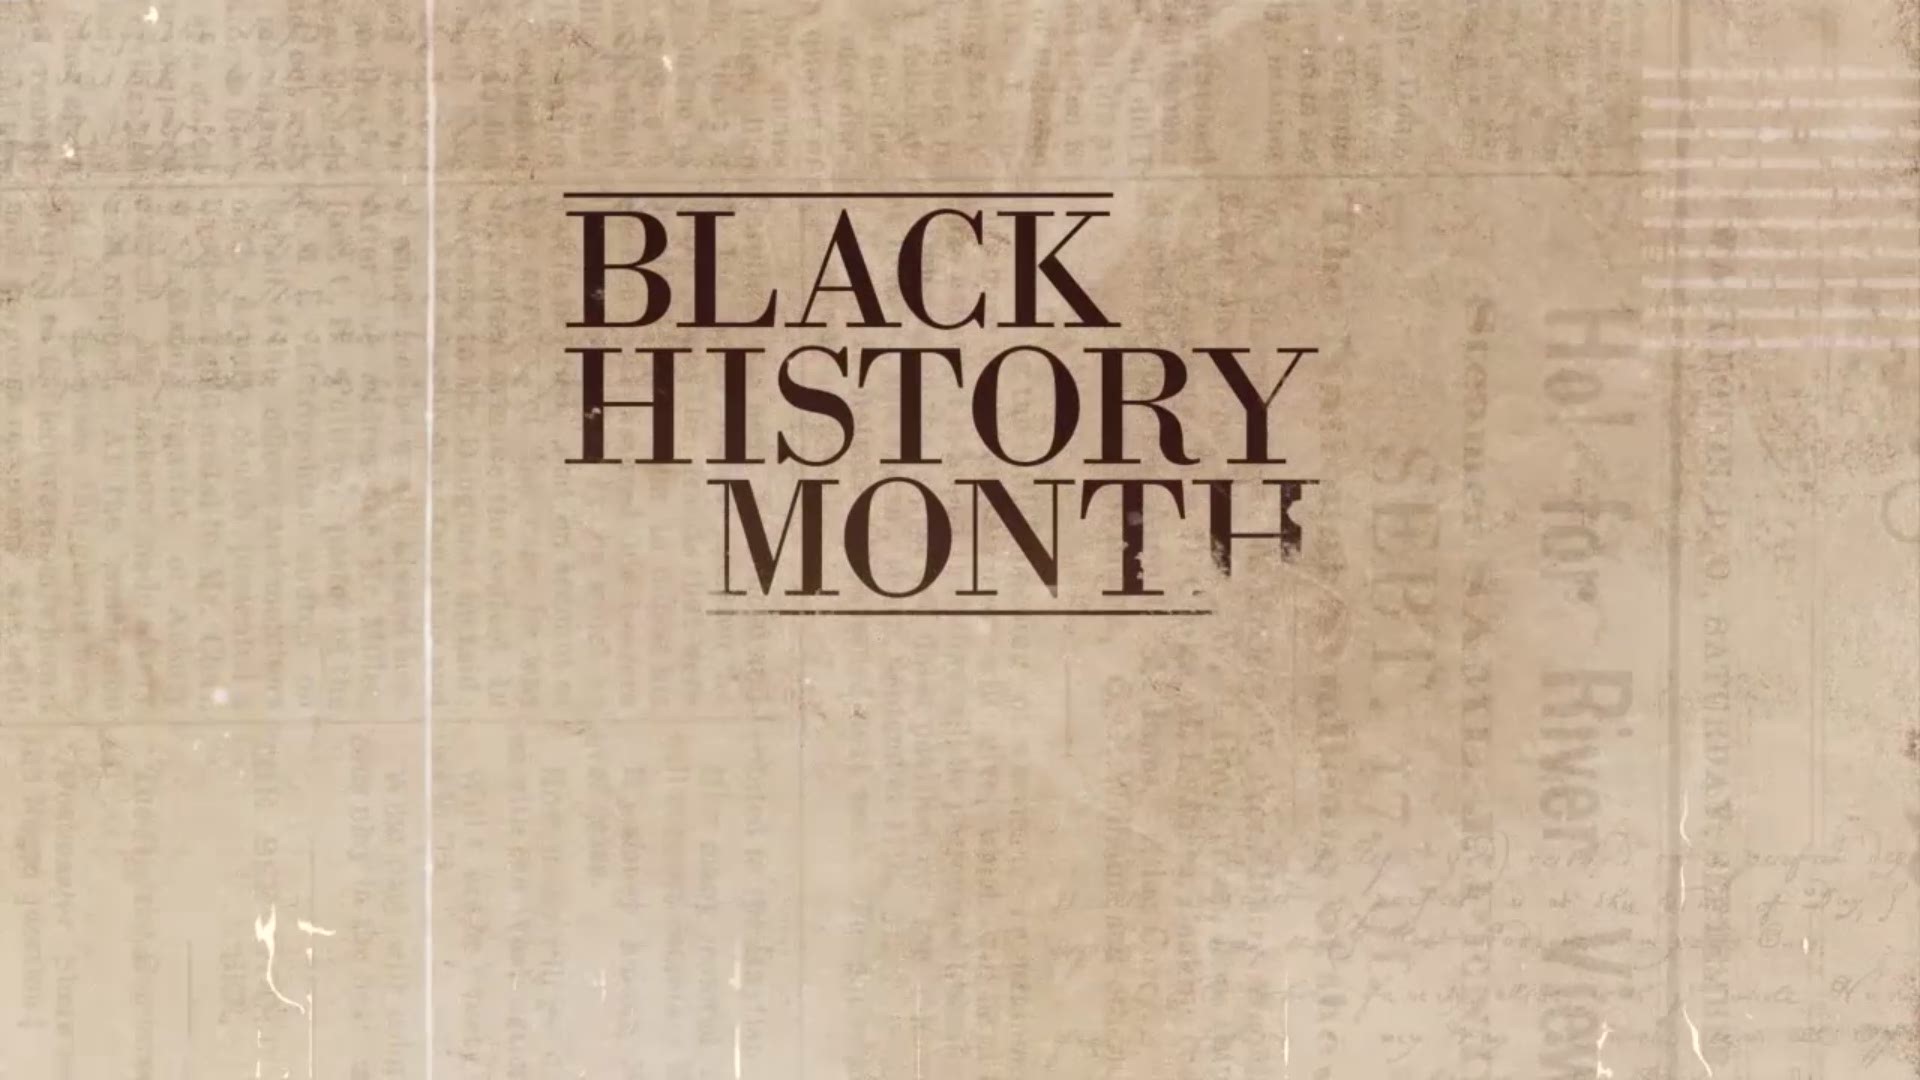 The Atlanta Life Insurance company presents: ‘Black History Month: The life – and insurance – of Martin Luther King, Jr.’ the following is sponsored by Atlanta Life